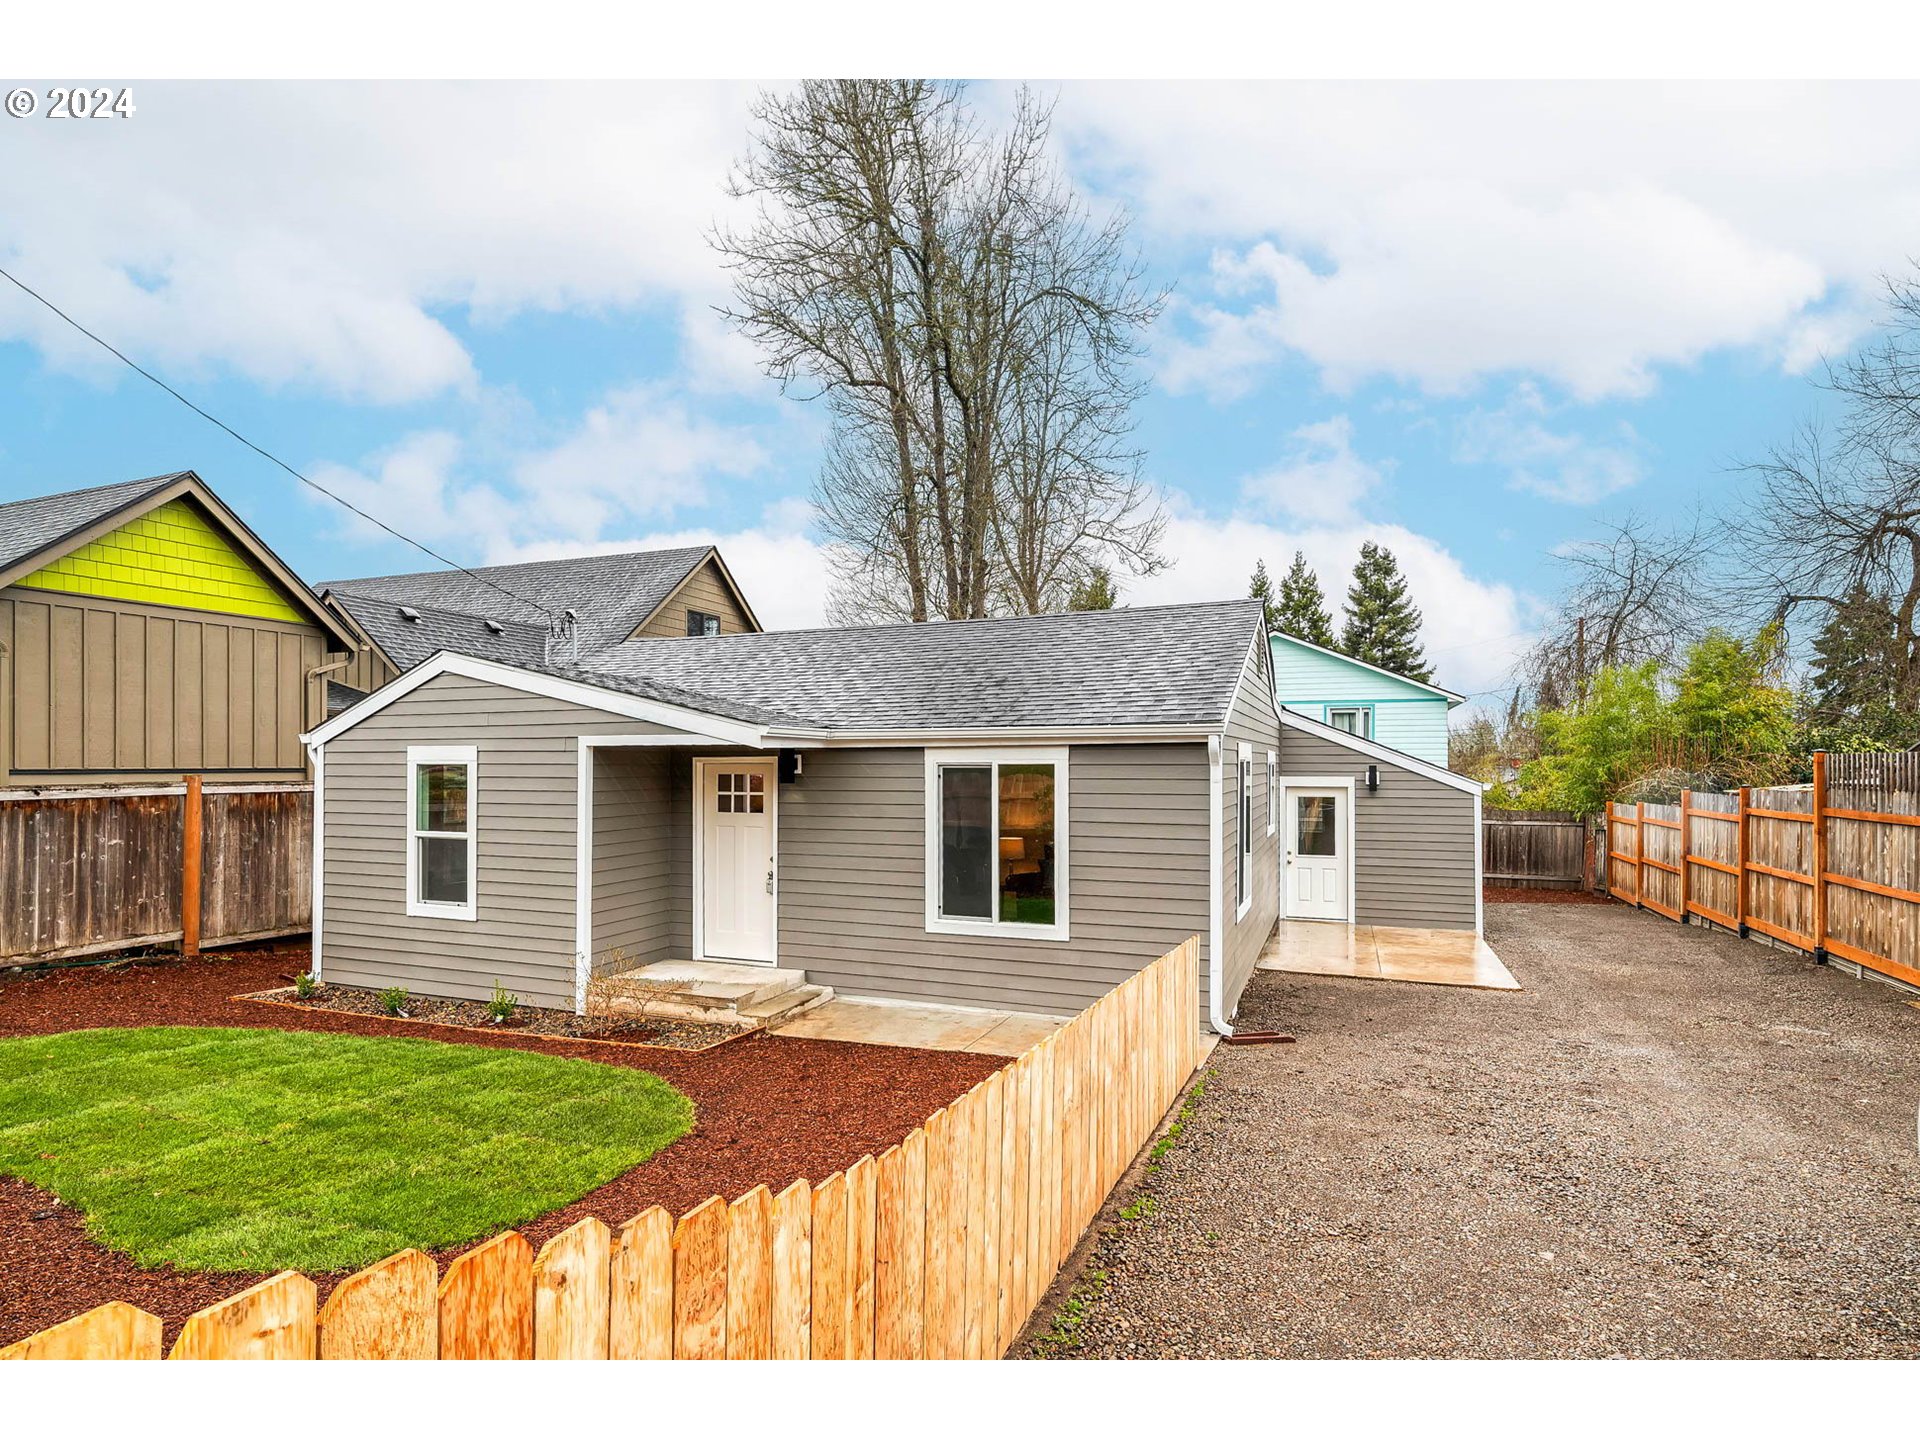 1085 W 28TH AVE, Eugene, OR 